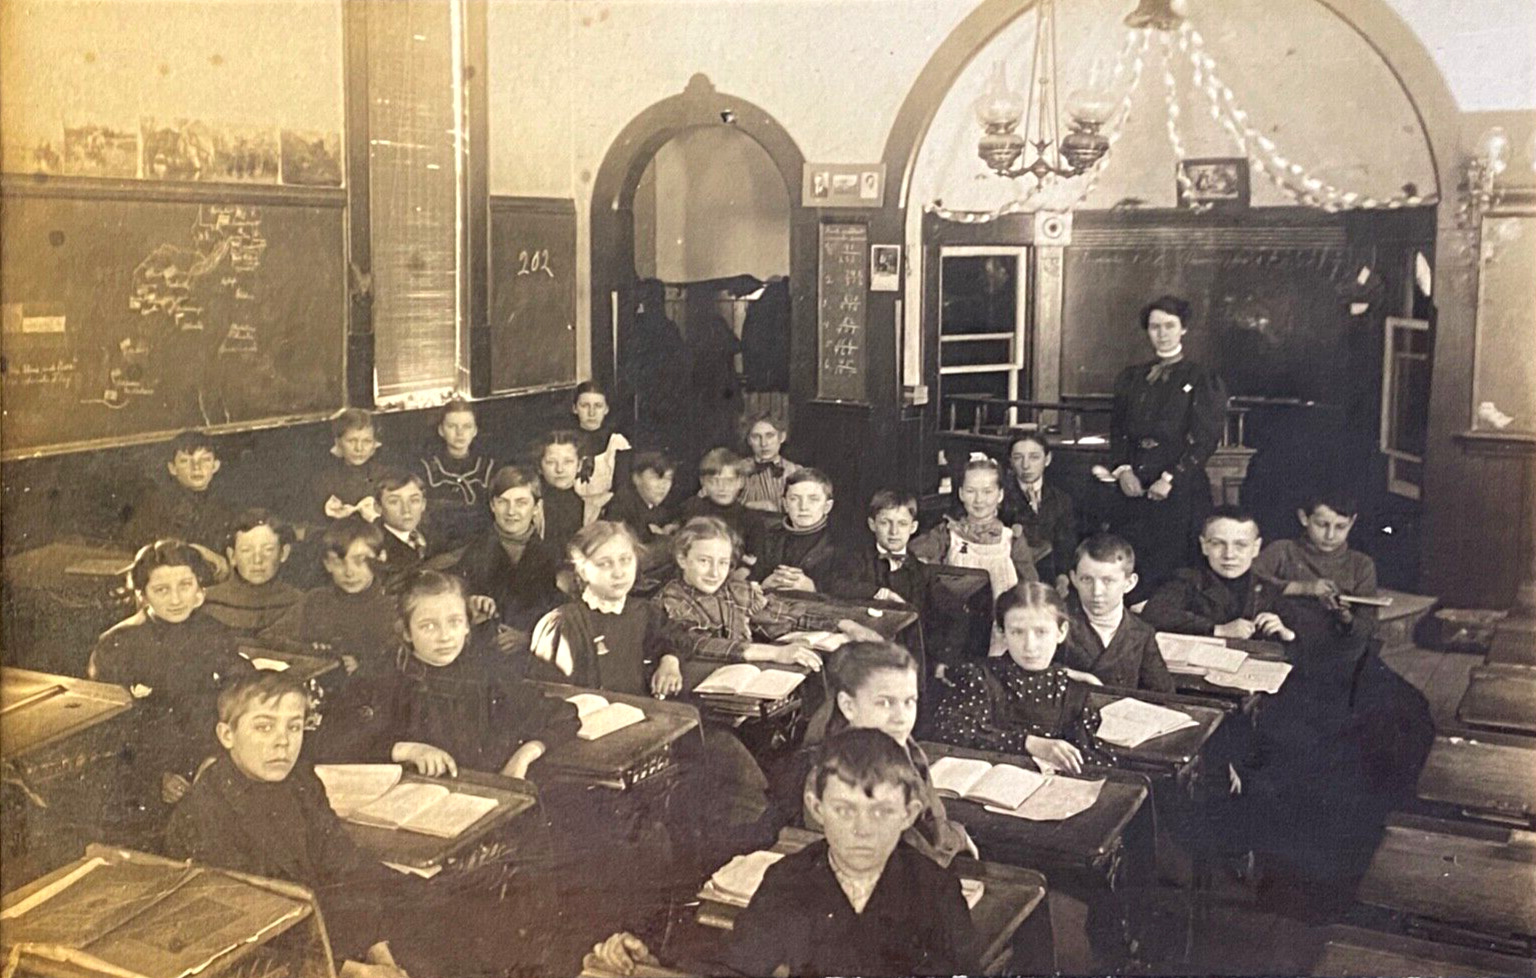 1890s OLD-TIMEY CLASSROOM antique 8x10 mounted photo ELEMENTARY GRADE SCHOOL